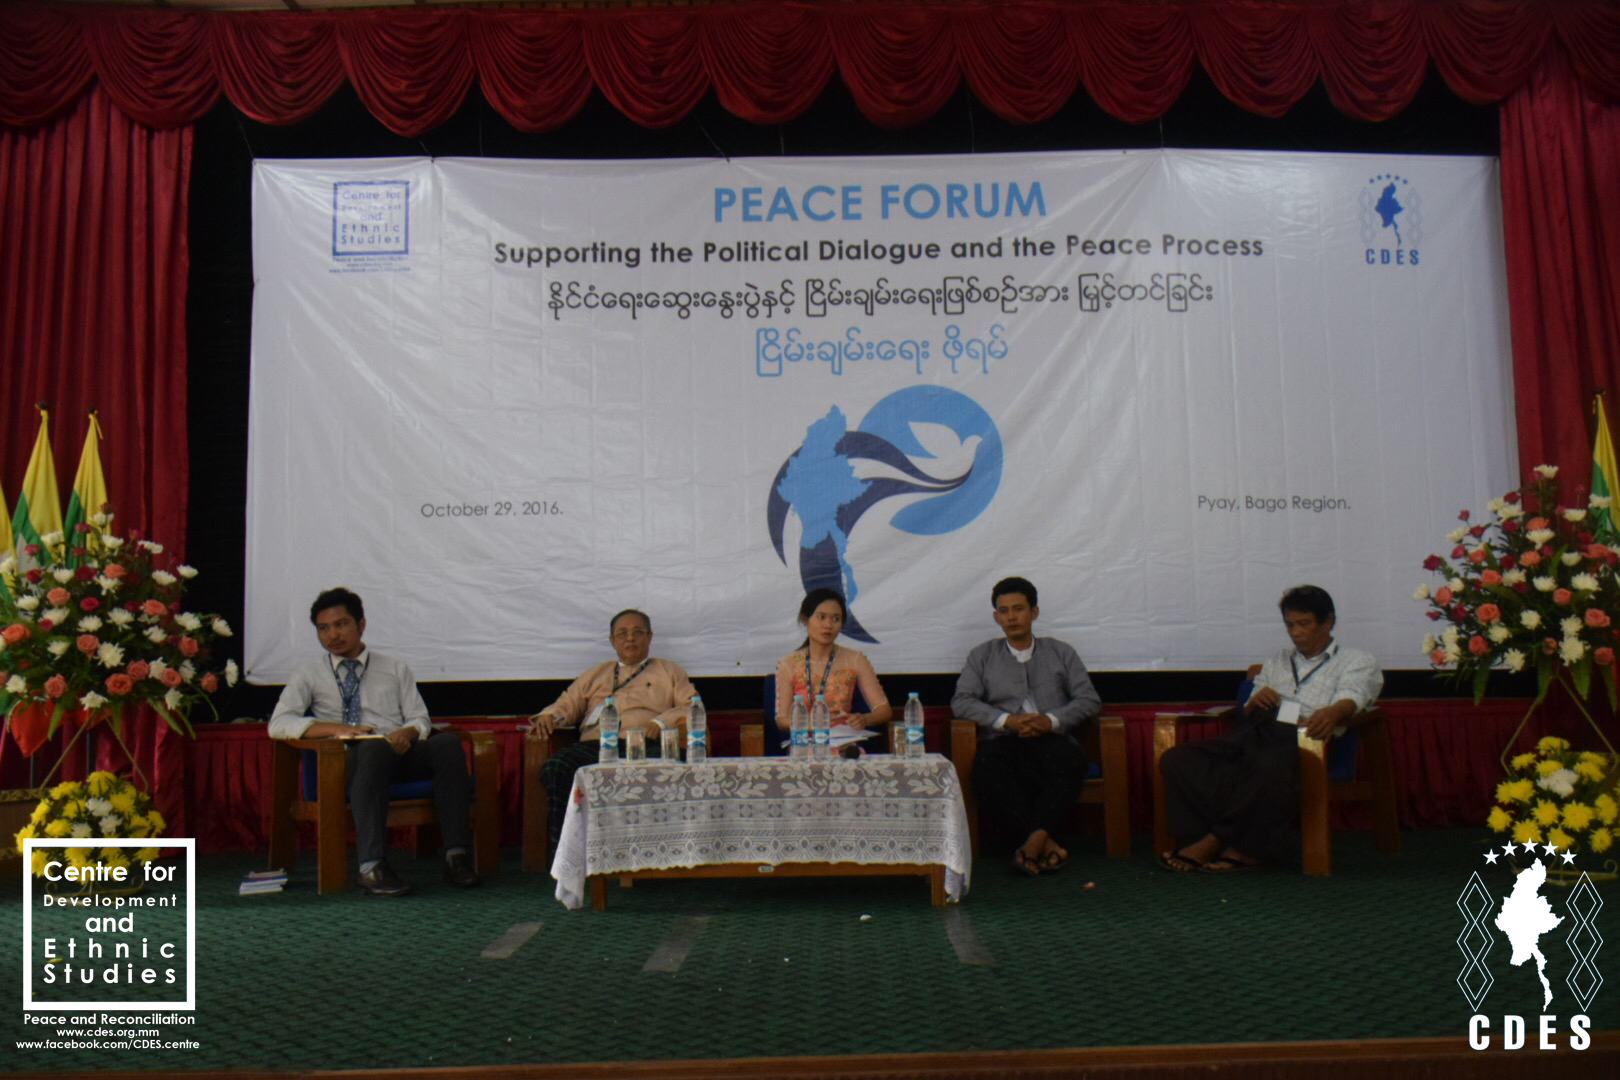 CDES holds Peace Forum in Bago Region.